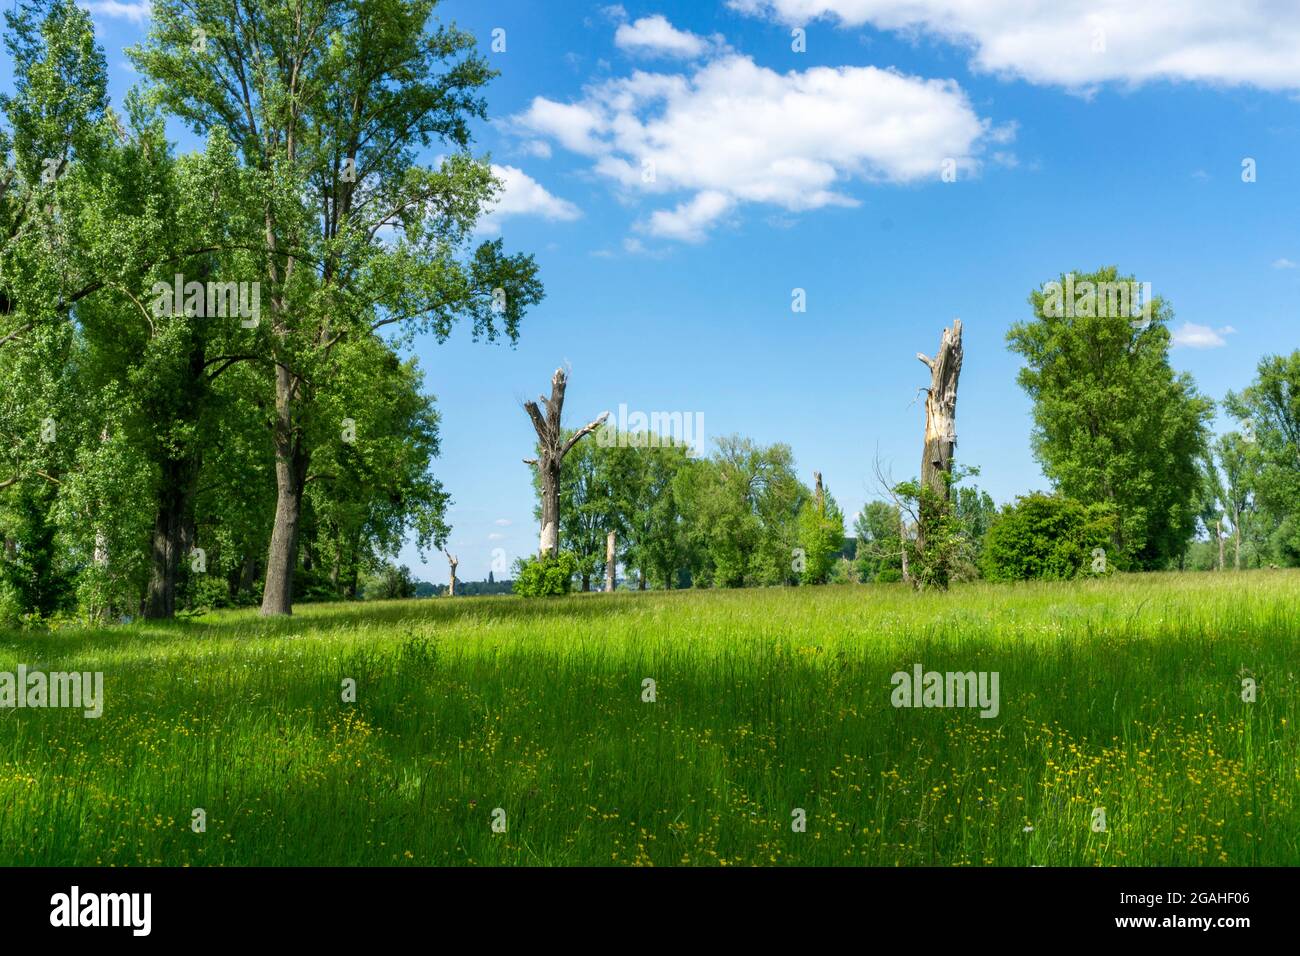 Urdenbachen Kämpe nature reserve, Lower Rhine cultural landscape with pollarded willows, fruit trees and wet meadows, Between the Rhine and an arm of Stock Photo